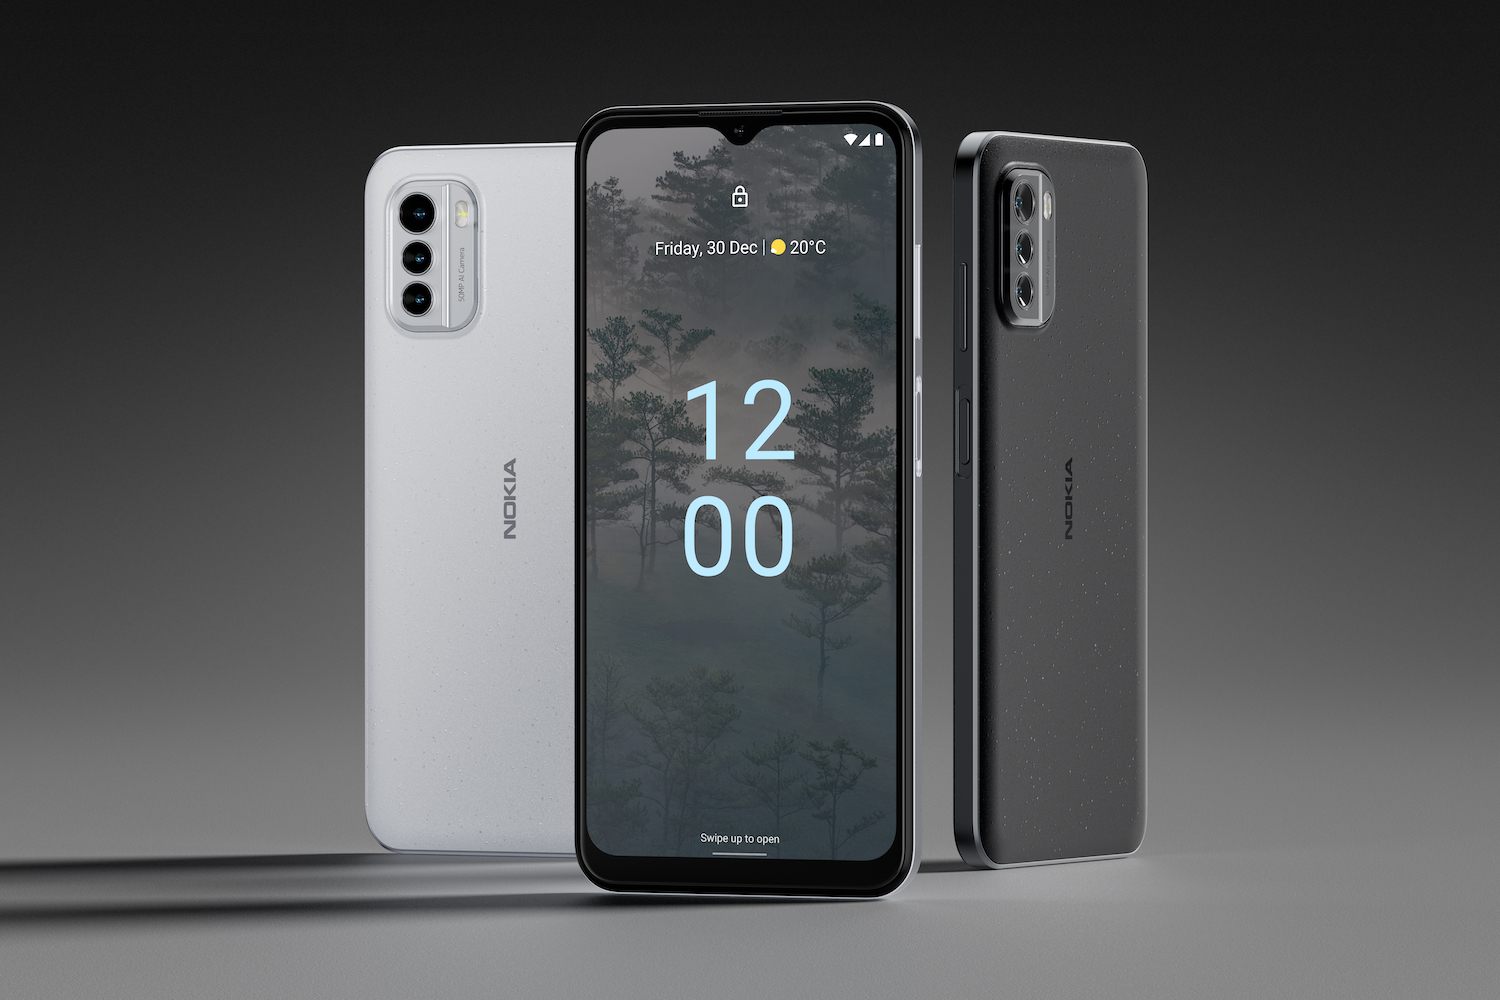 A render of the Nokia G60 smartphone.